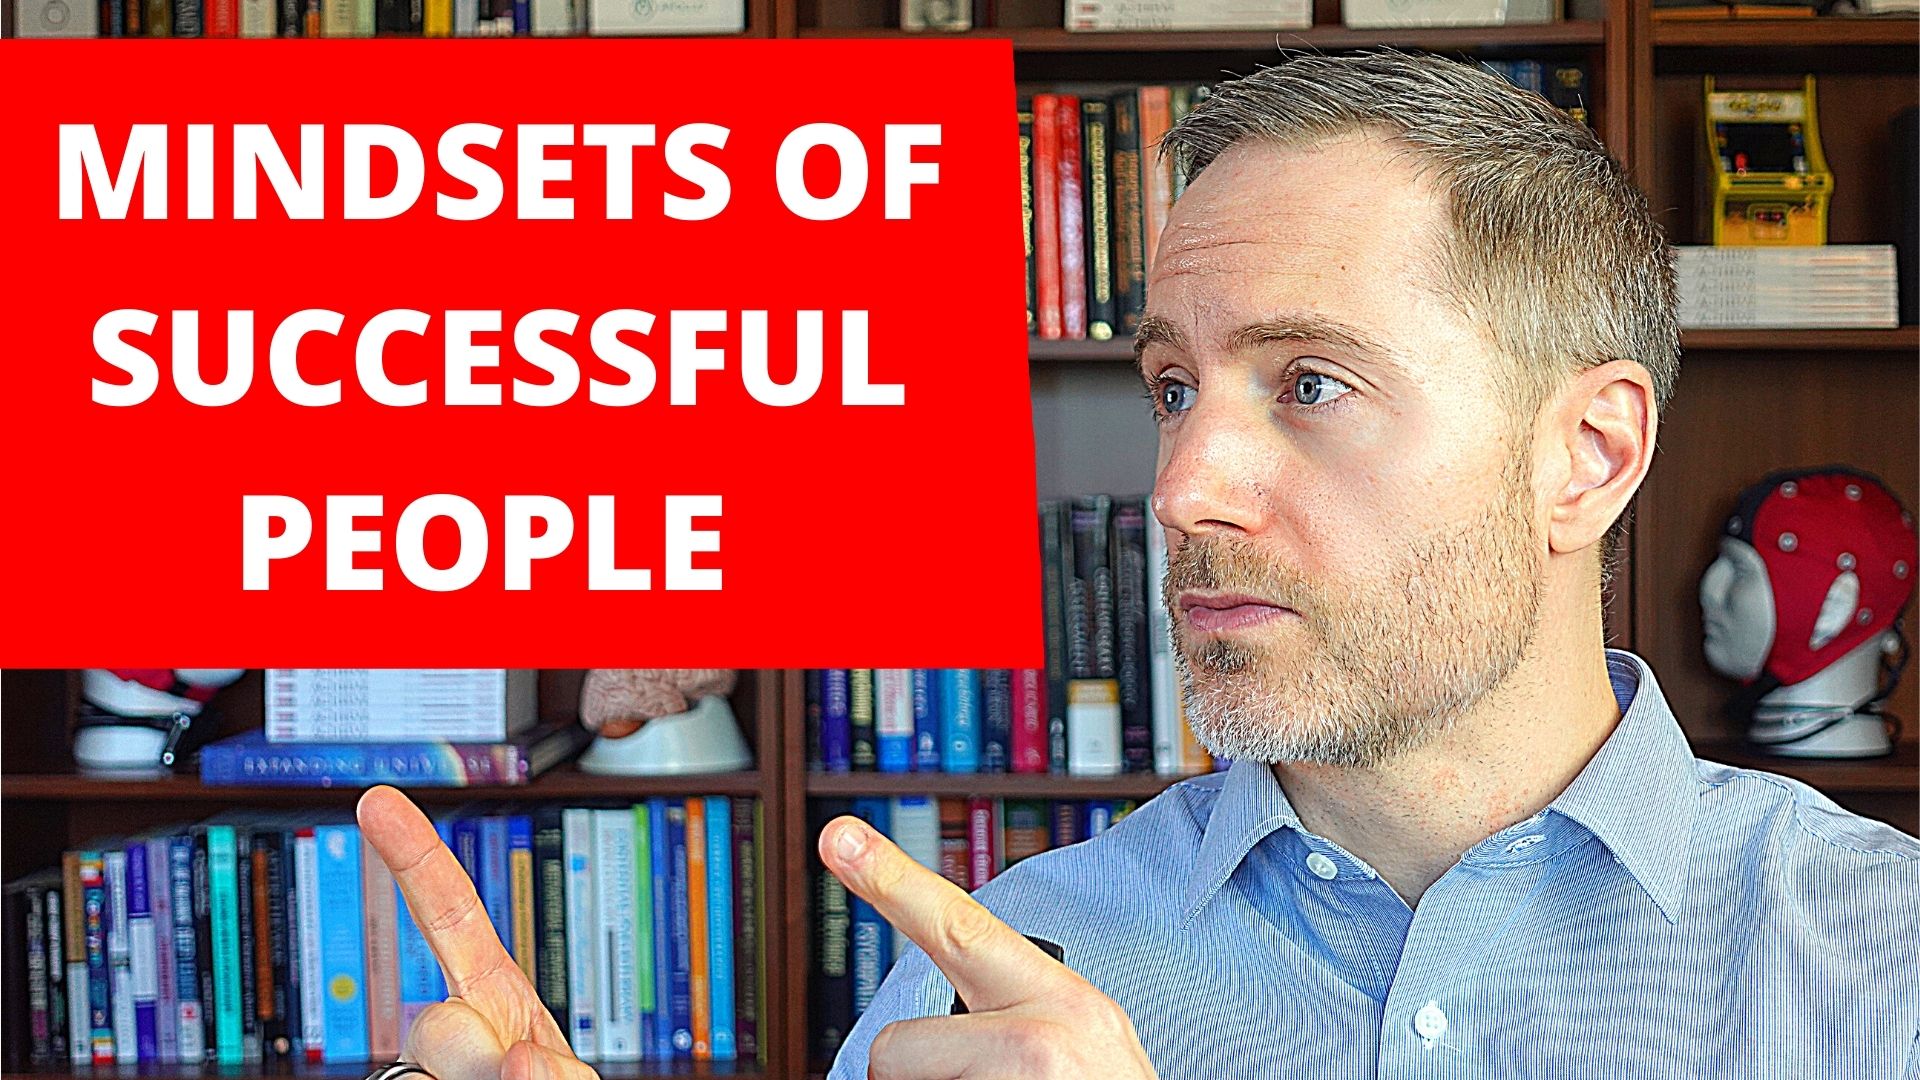 Mindsets of Successful People